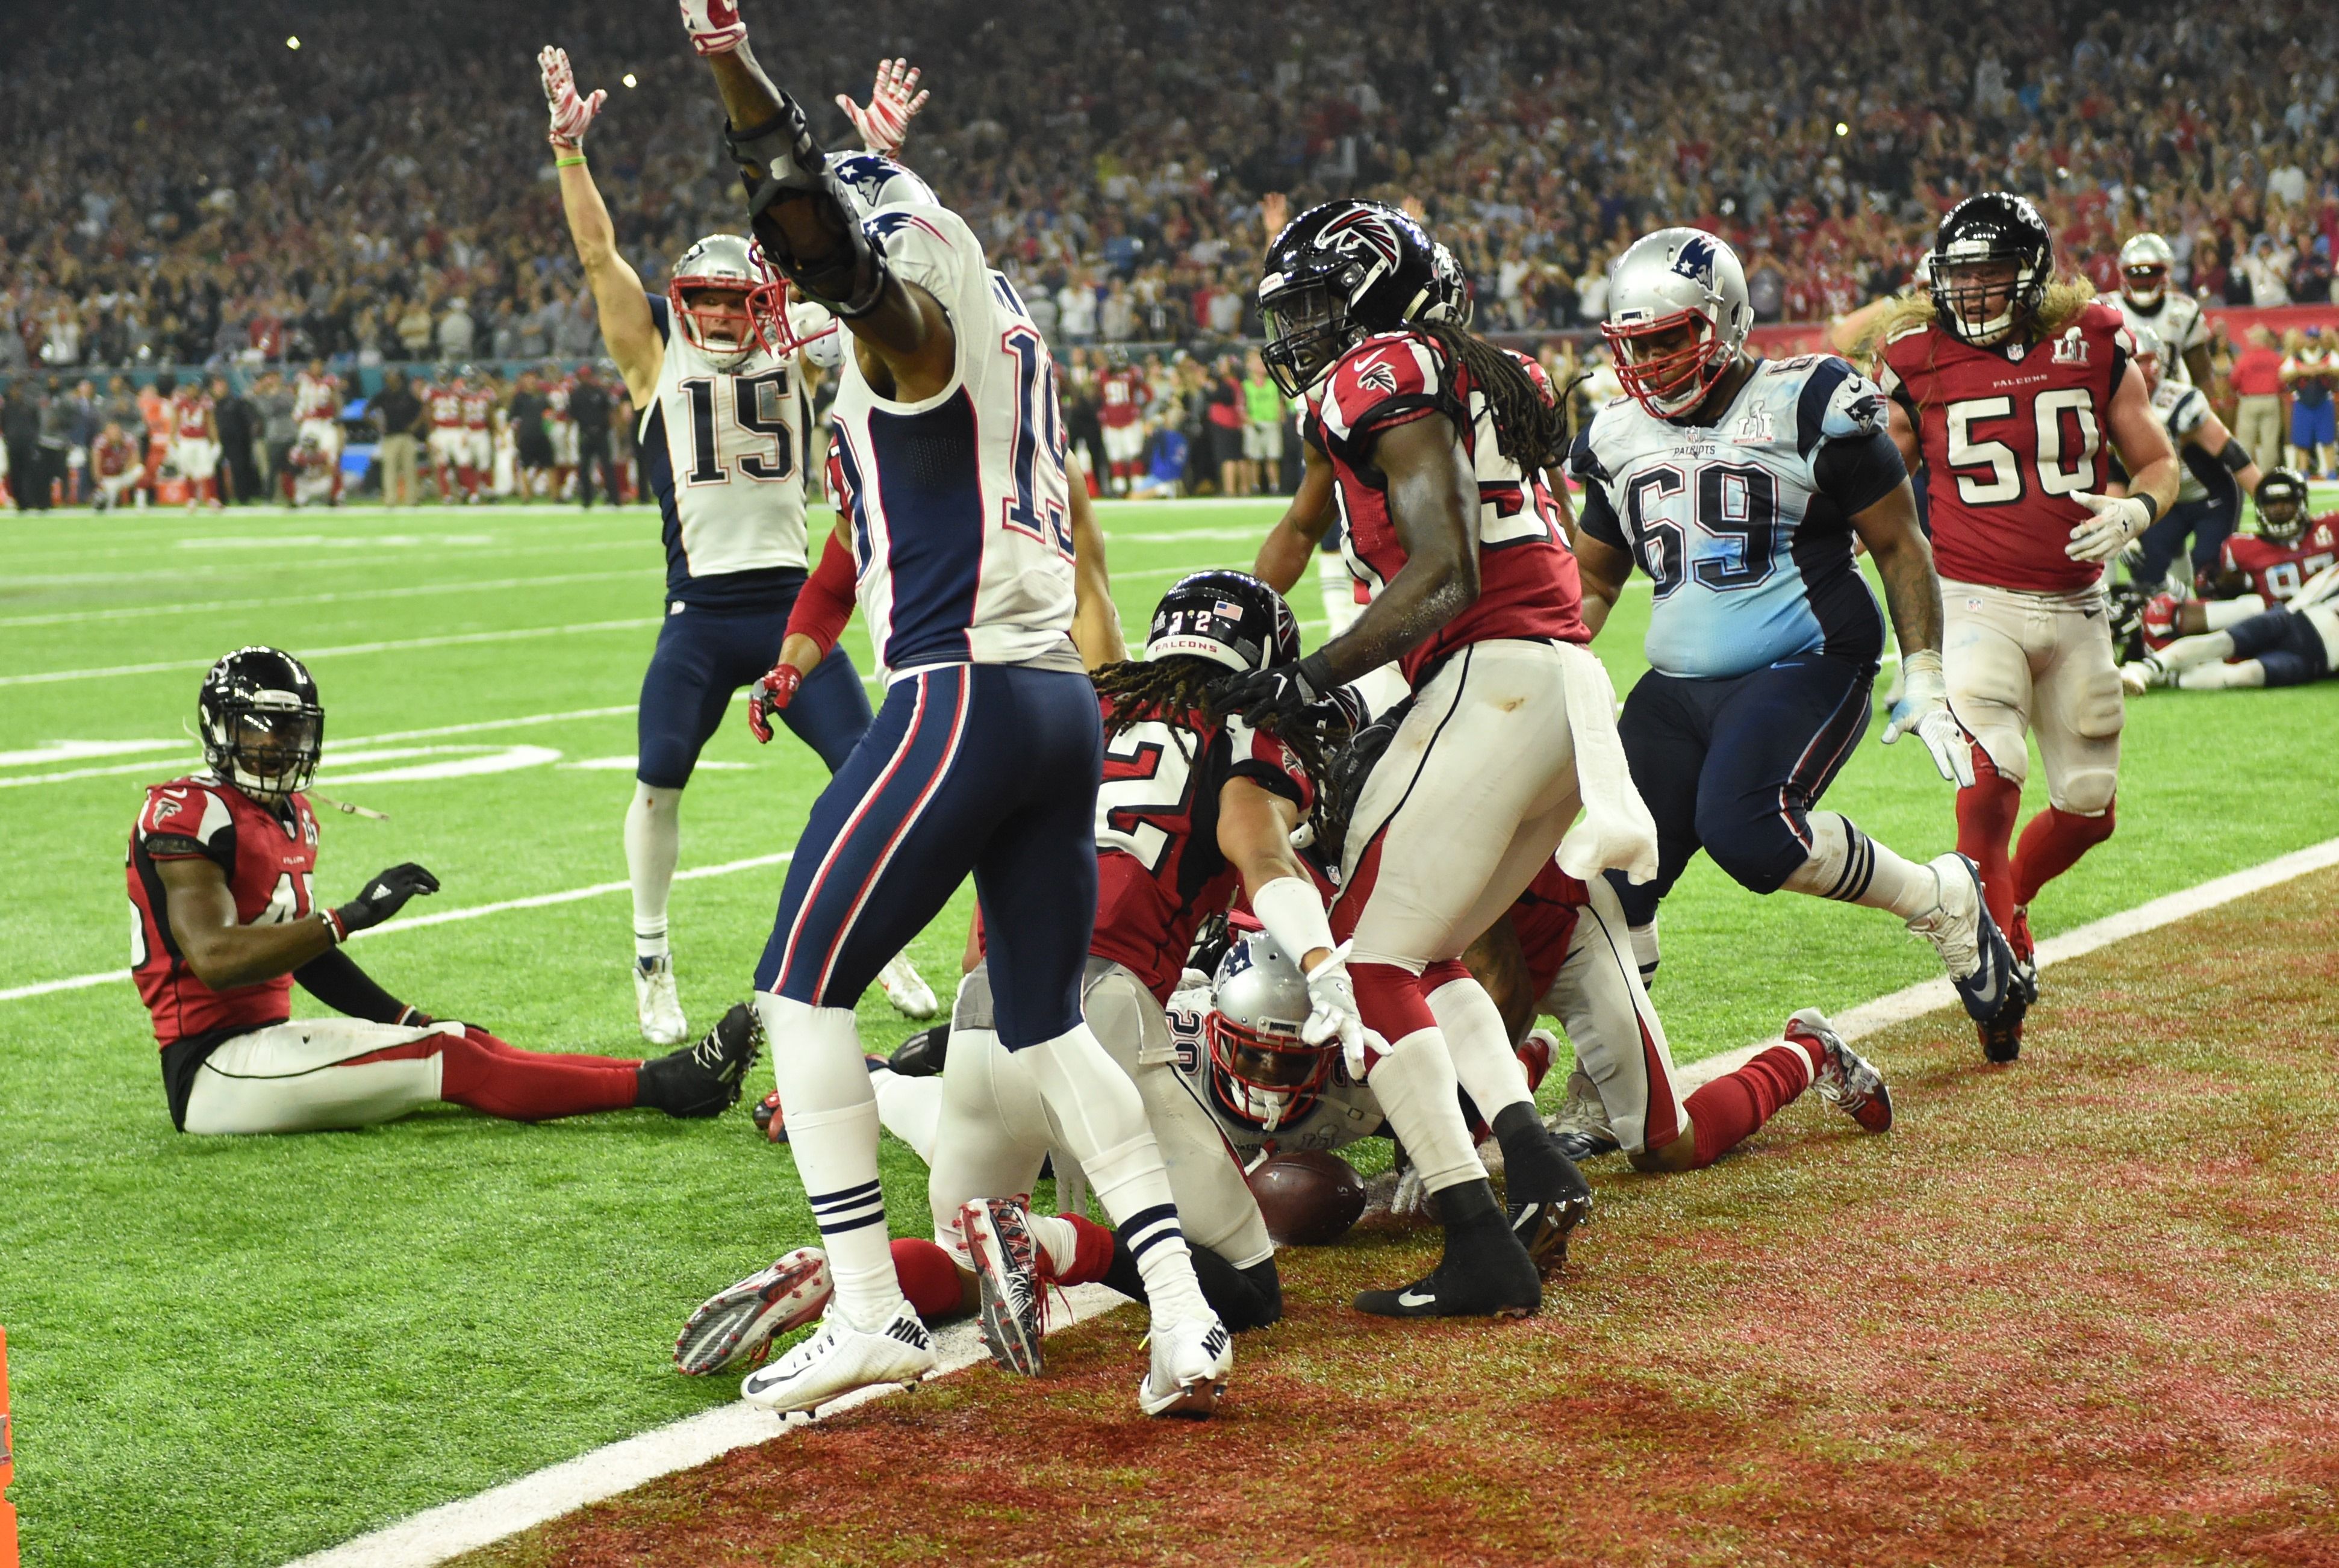 TOPSHOT - James White #28 of the New England Patriots scores the game winning touchdown in overtime against the Atlanta Falcons during Super Bowl 51 at NRG Stadium on February 5, 2017 in Houston, Texas / AFP / Timothy A. CLARY (Photo credit should read TIMOTHY A. CLARY/AFP/Getty Images)